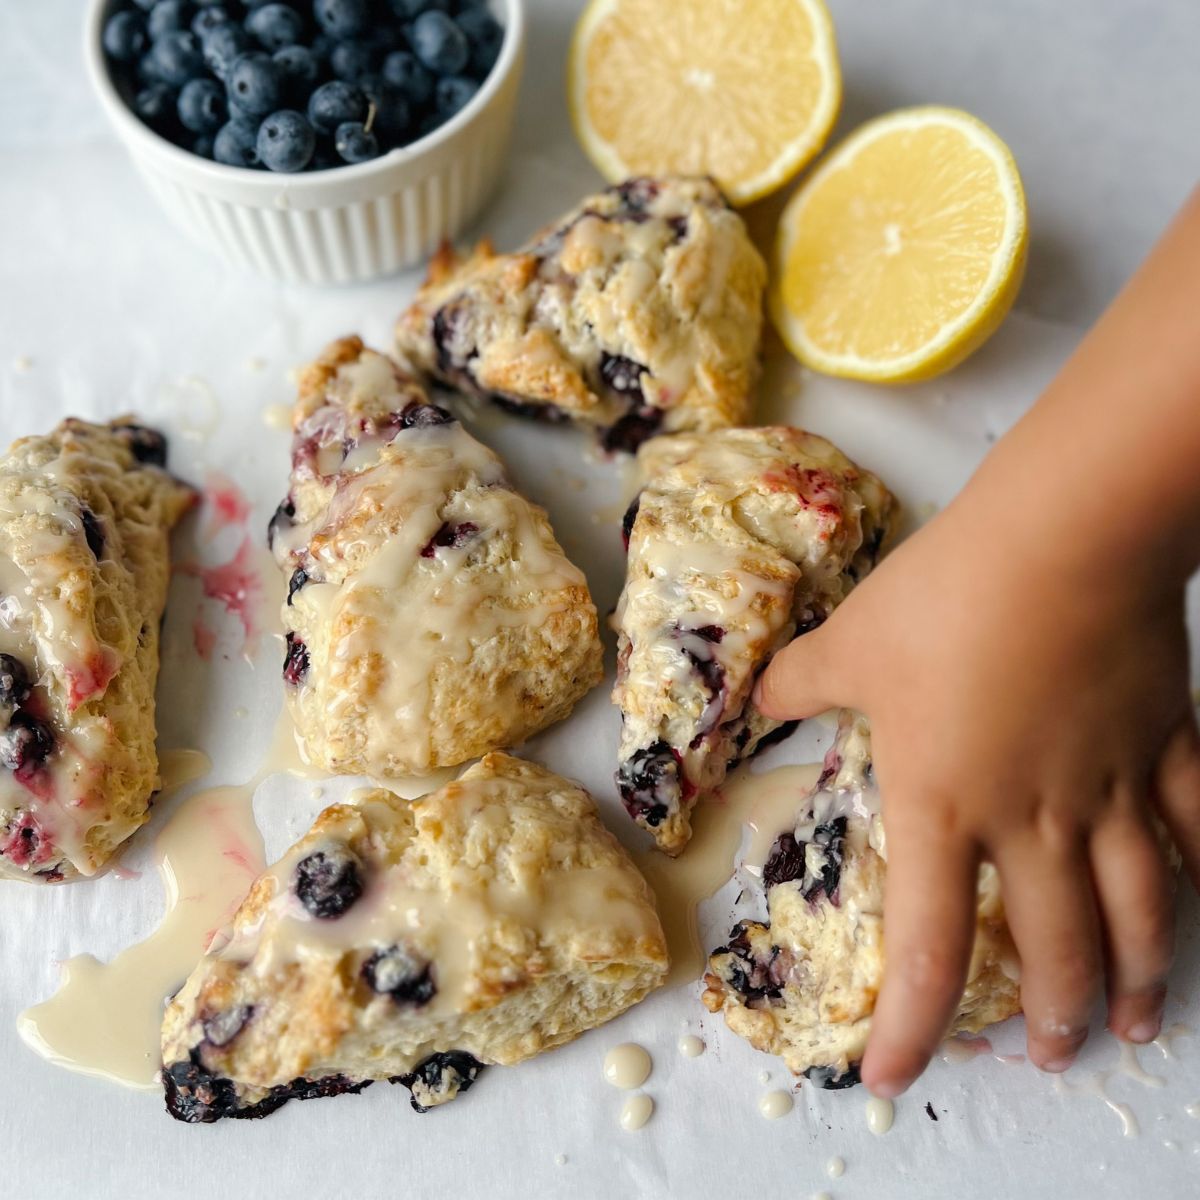 Buttermilk lemon blueberry scones sitting on parchment paper with a child's hand reaching toward one with lemons and blueberries in the background.